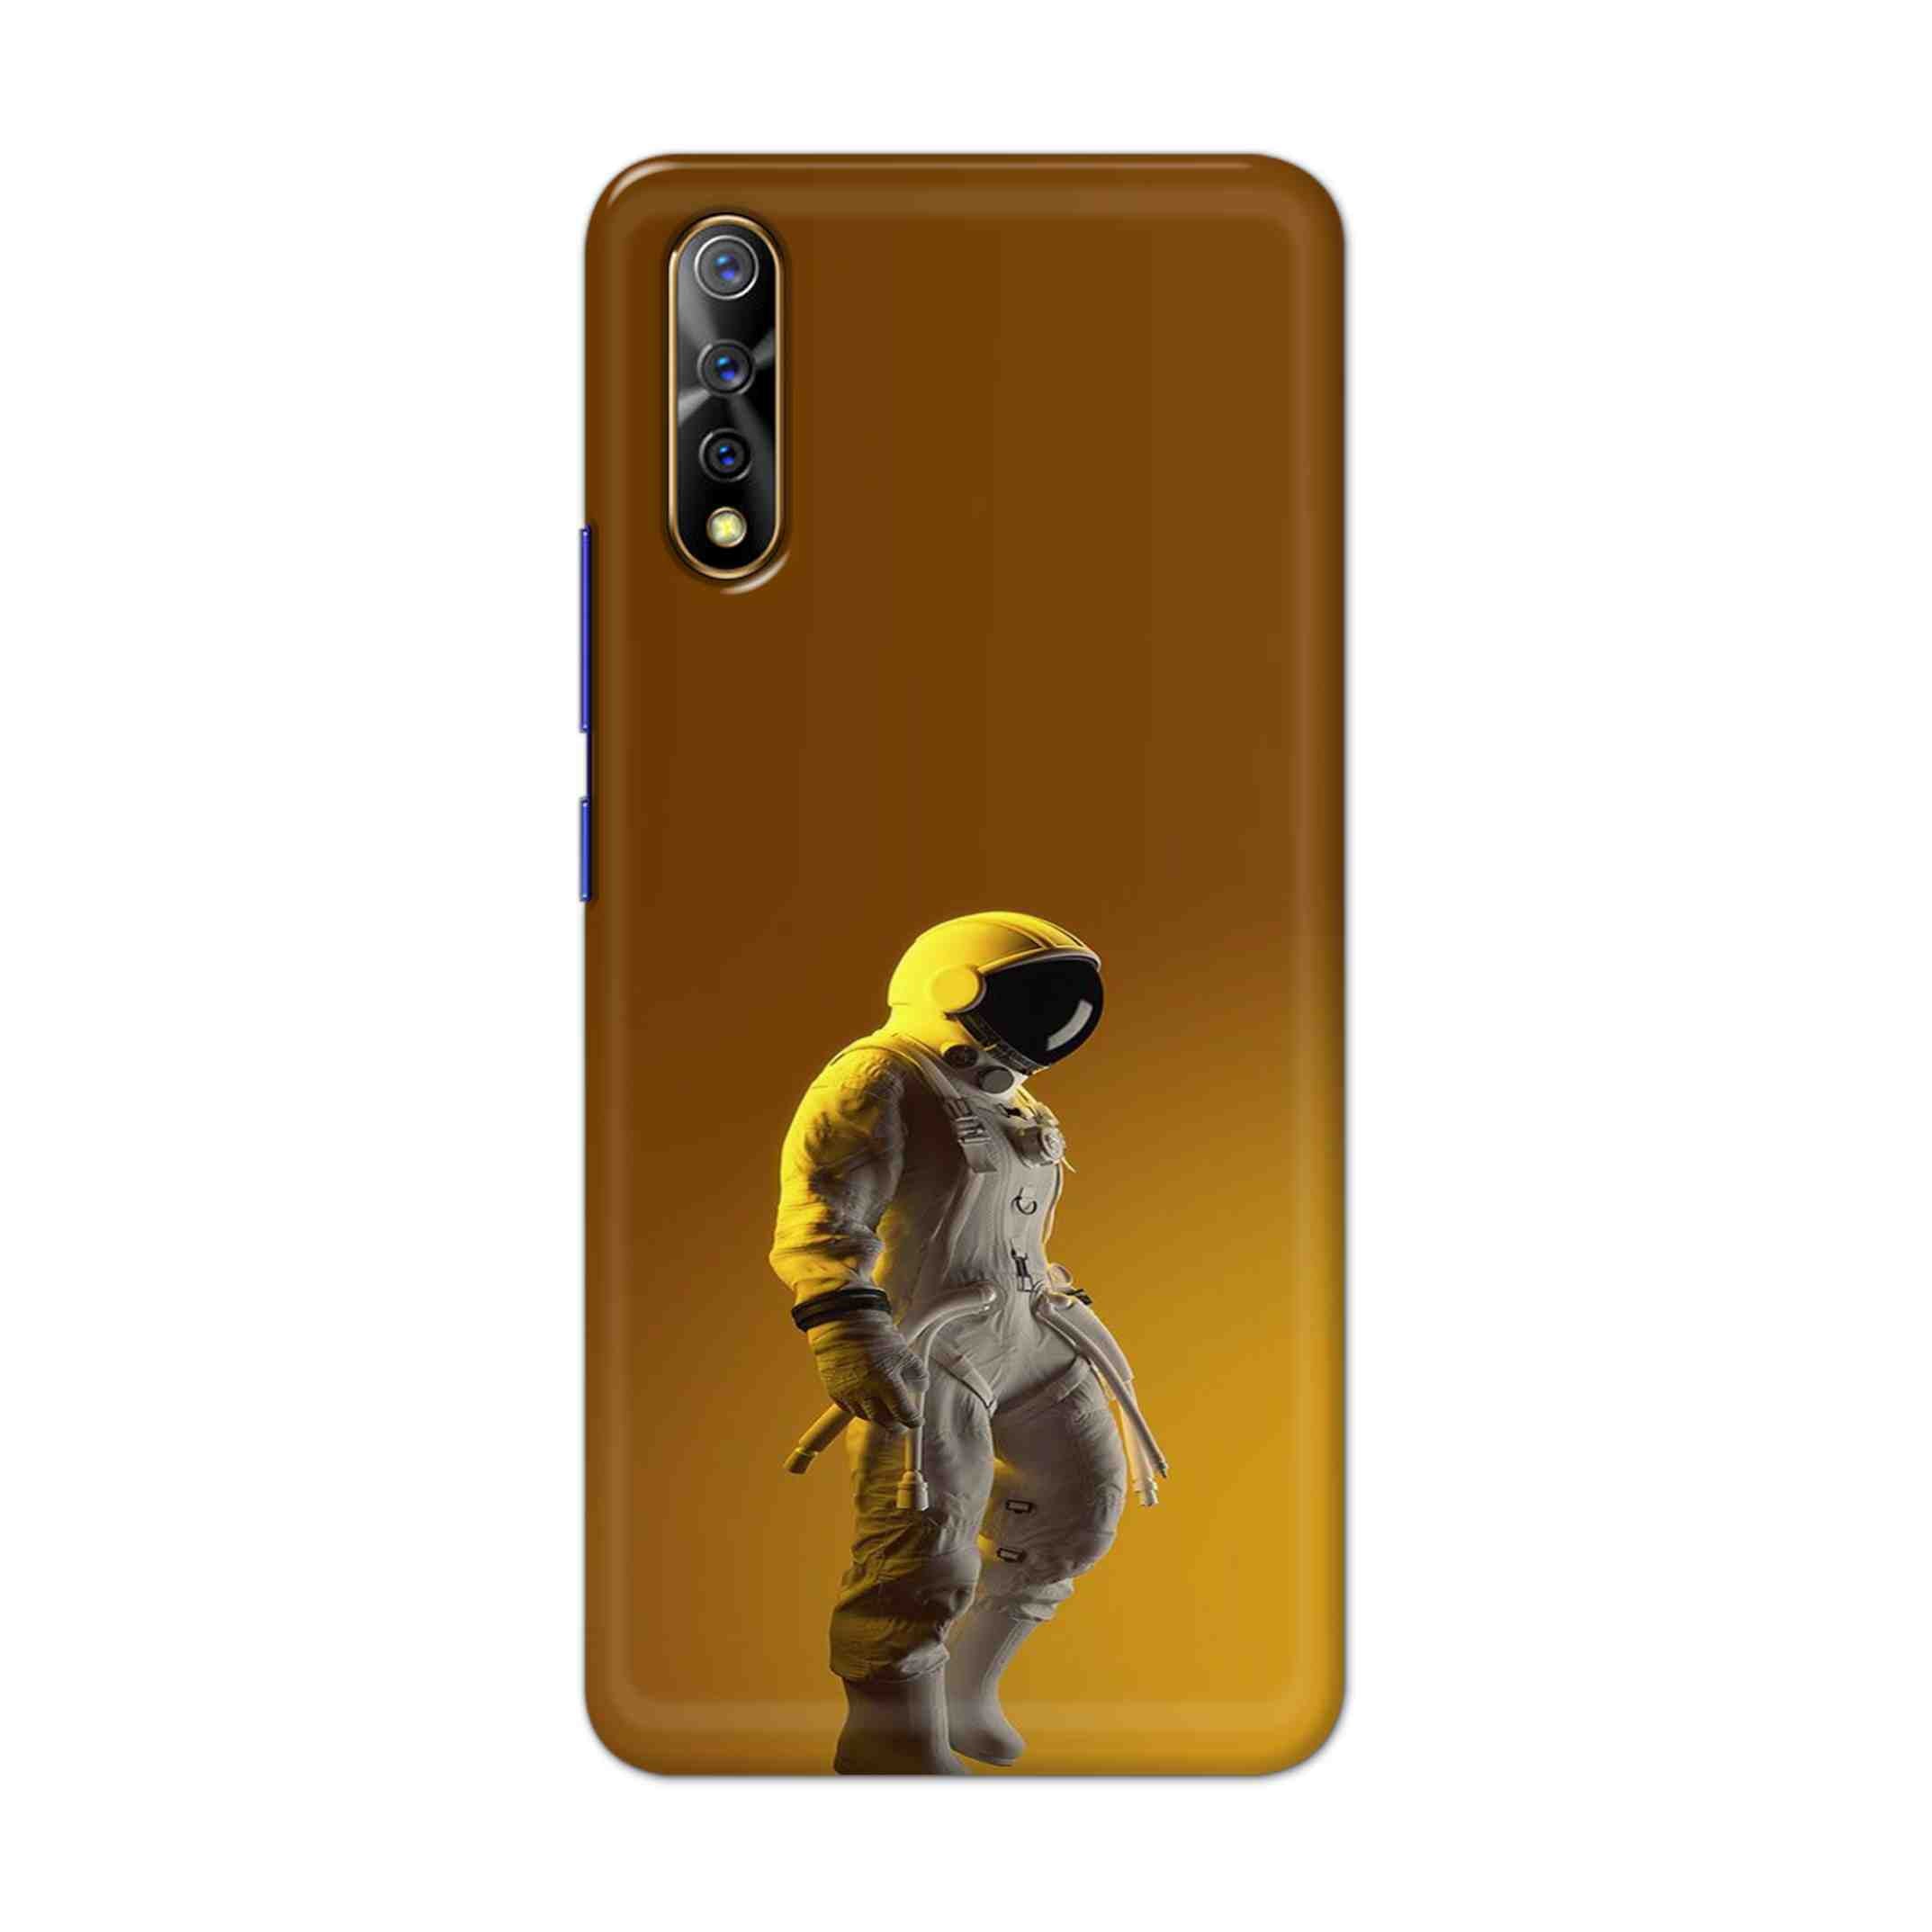 Buy Yellow Astronaut Hard Back Mobile Phone Case Cover For Vivo S1 / Z1x Online